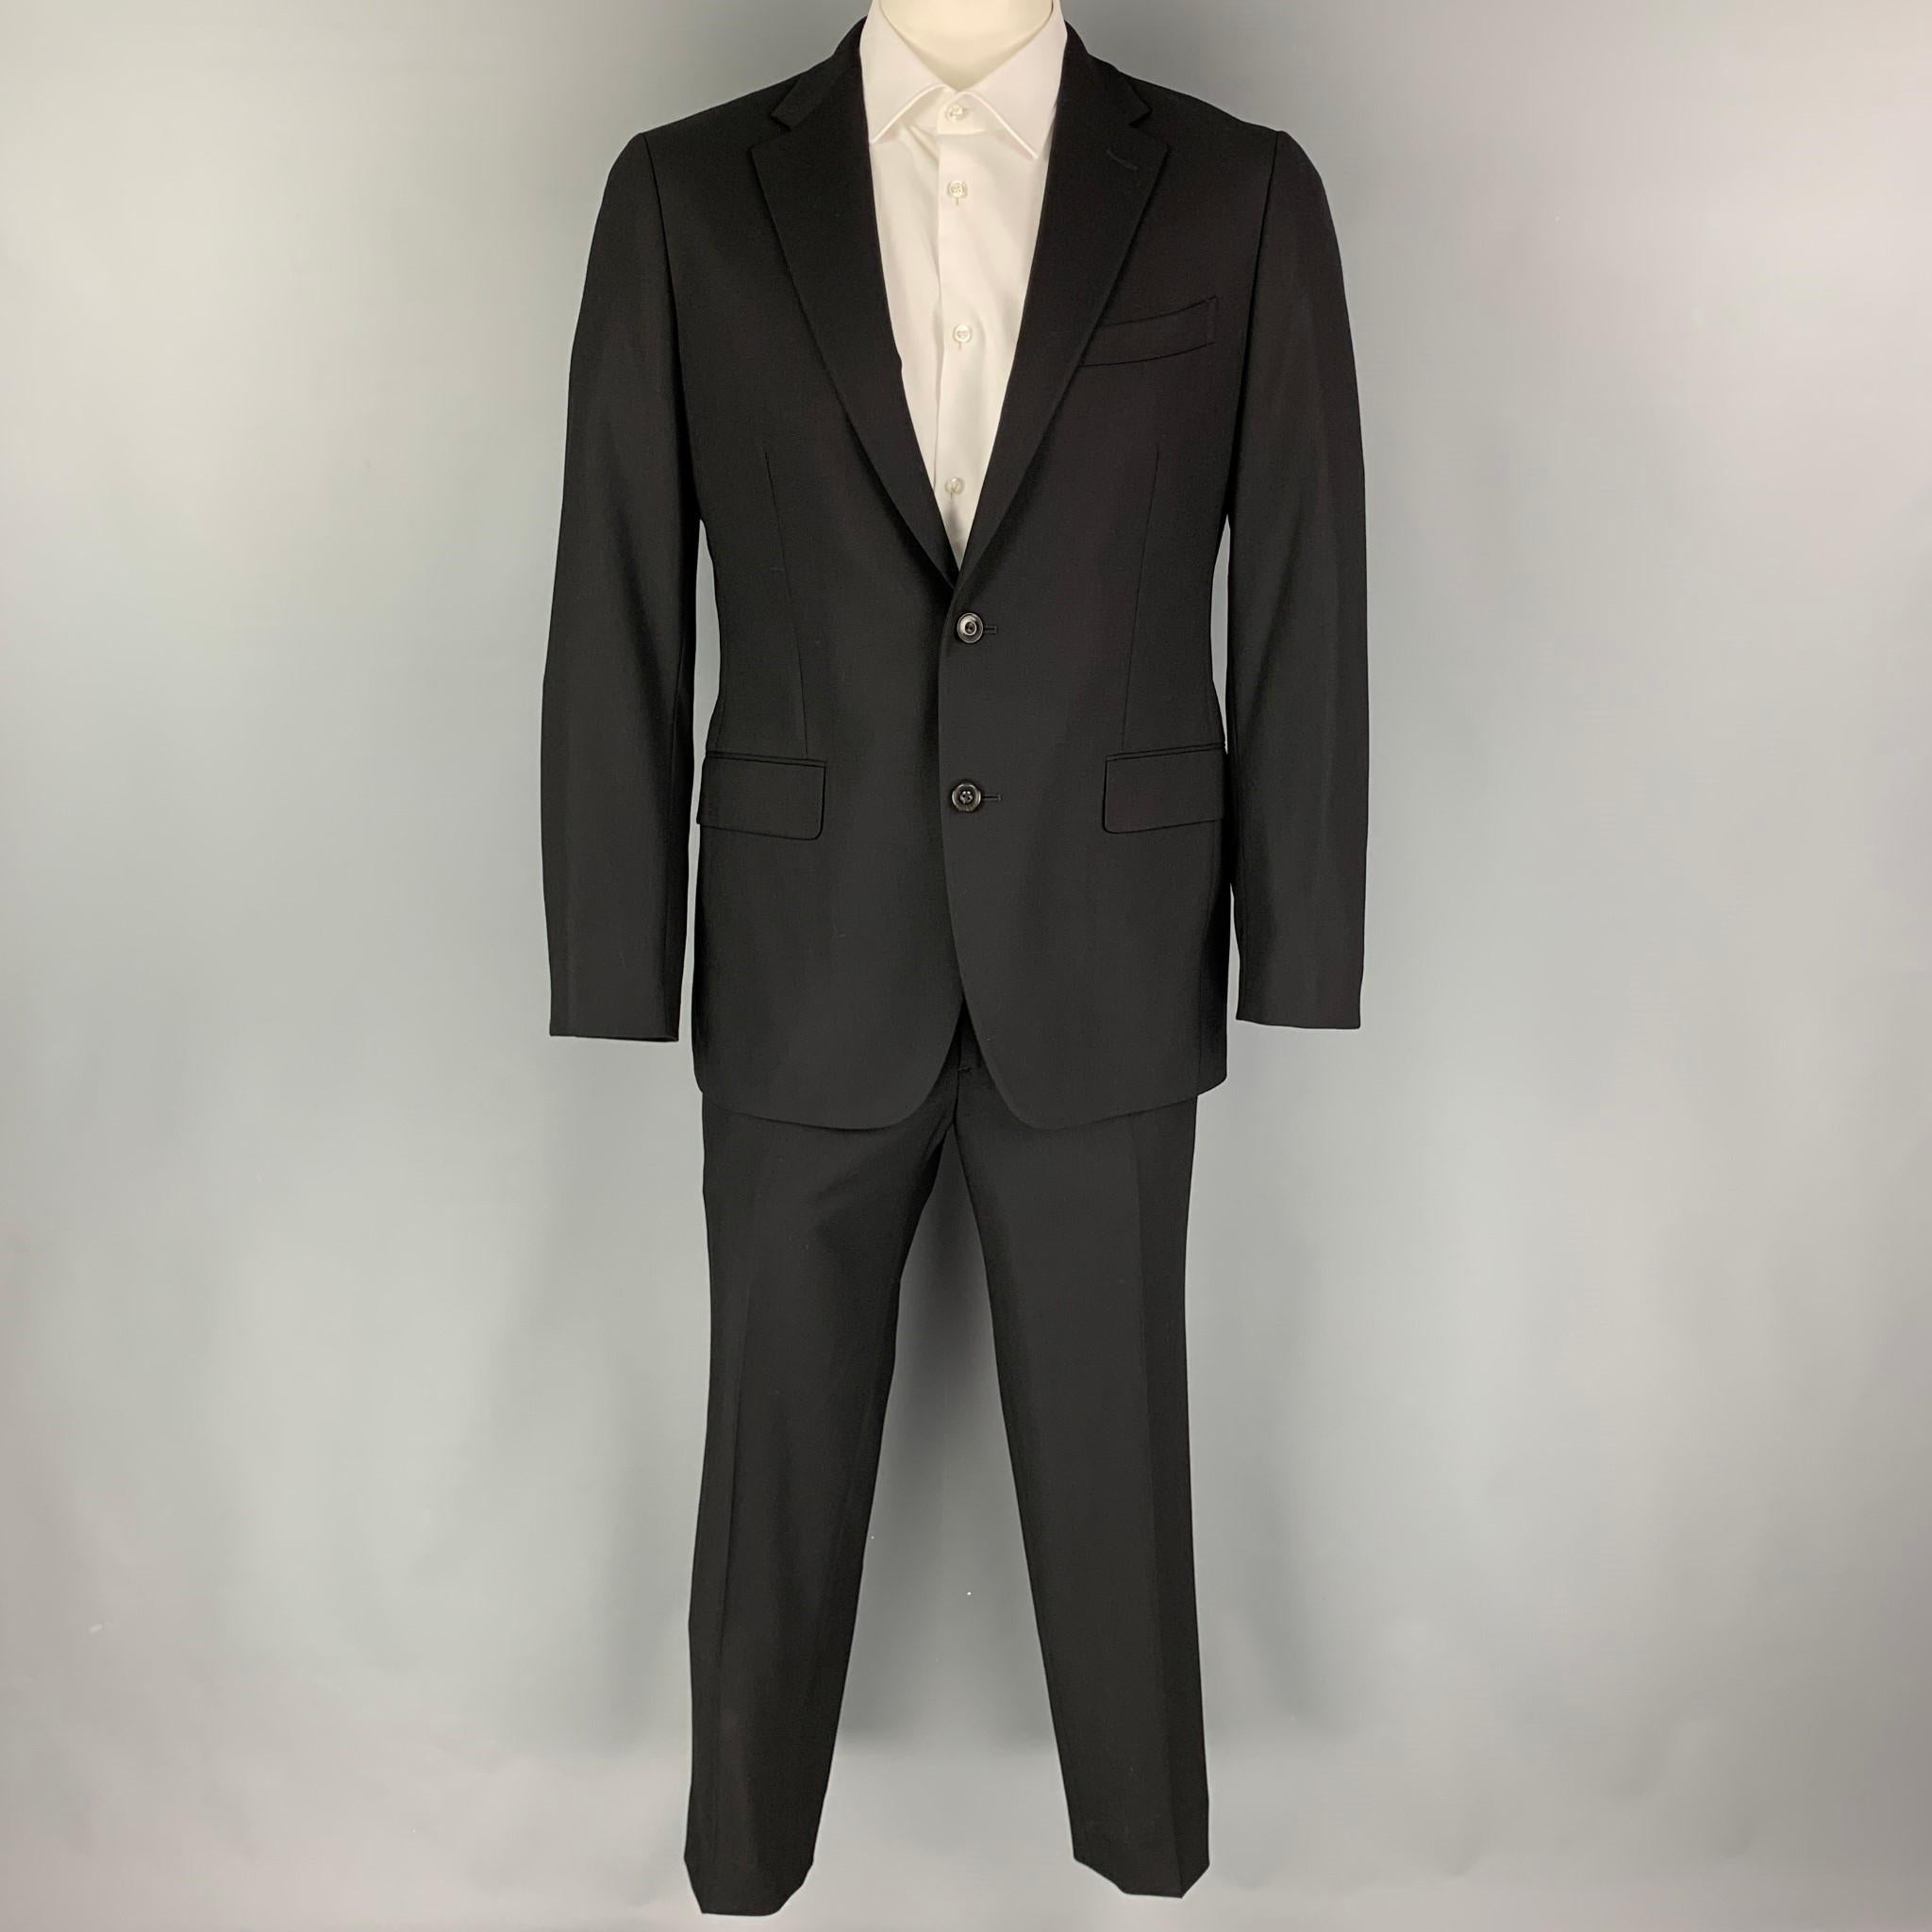 BOGLIOLI suit comes in a black wool with a full liner and includes a single breasted, double button sport coat with a notch lapel and matching flat front trousers.

Very Good Pre-Owned Condition.
Marked: 52

Measurements:

-Jacket
Shoulder: 18